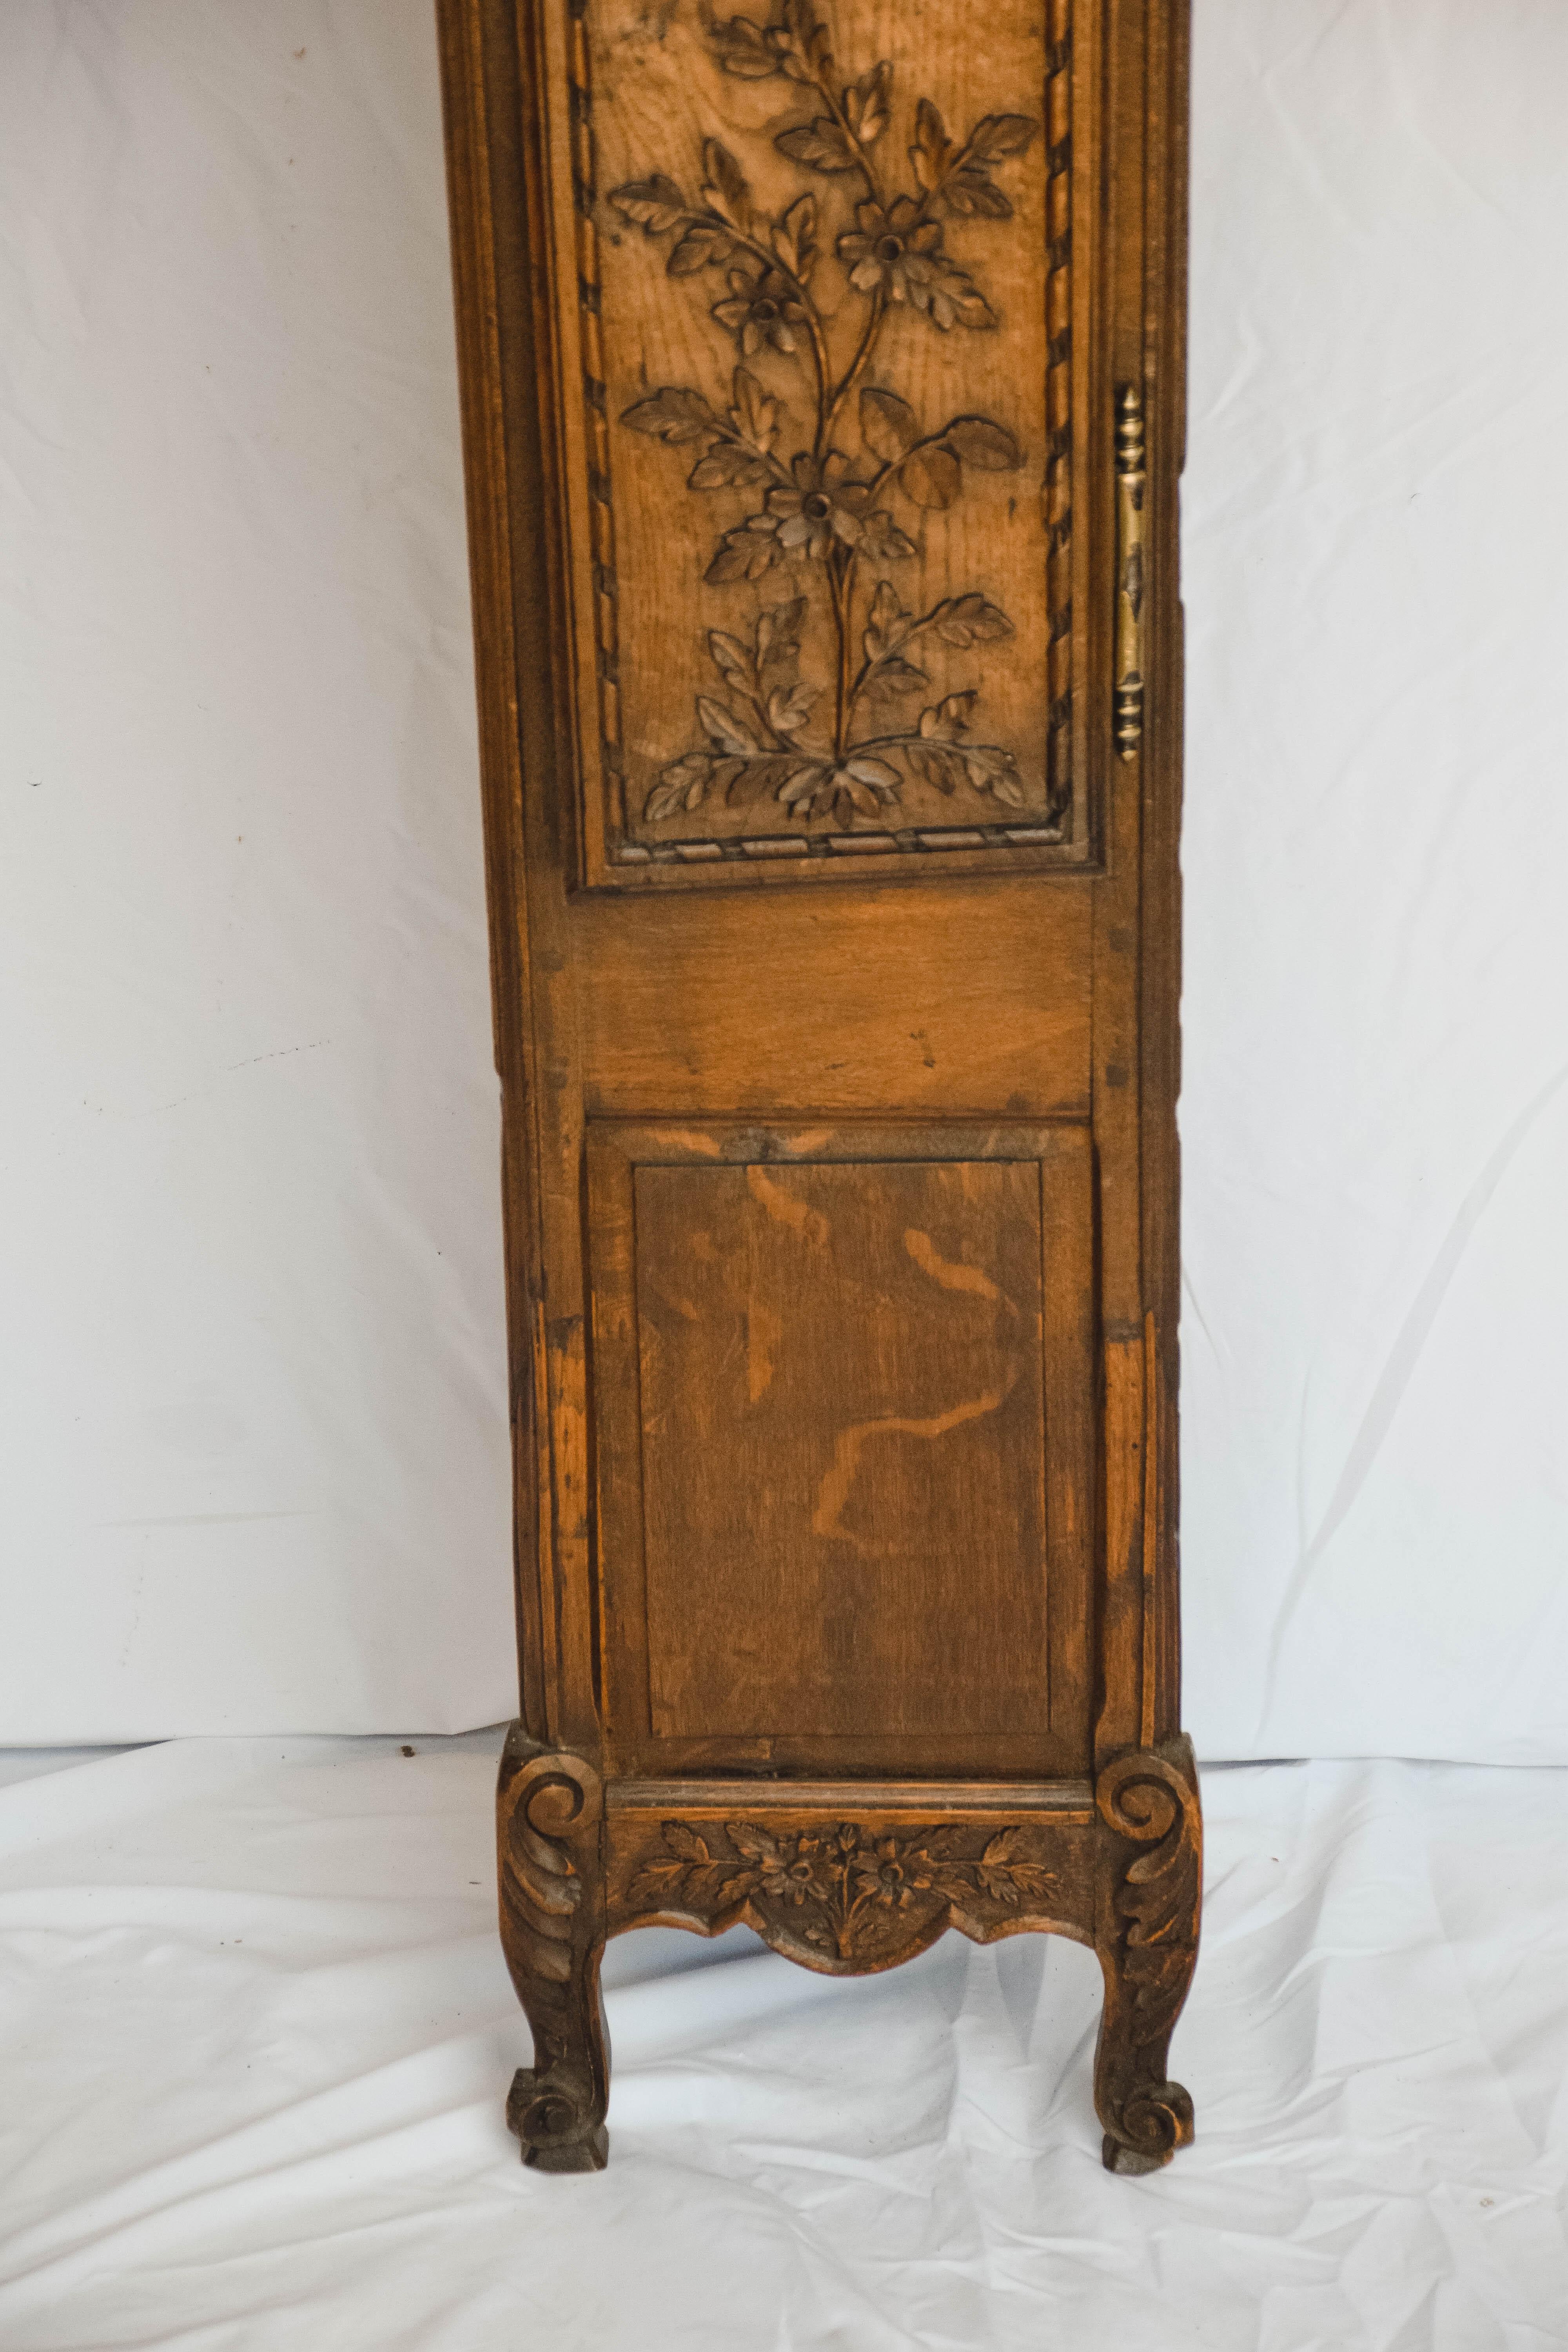 Hand-Carved Superb Carved 18th c French Lantern Clock Case with Movement